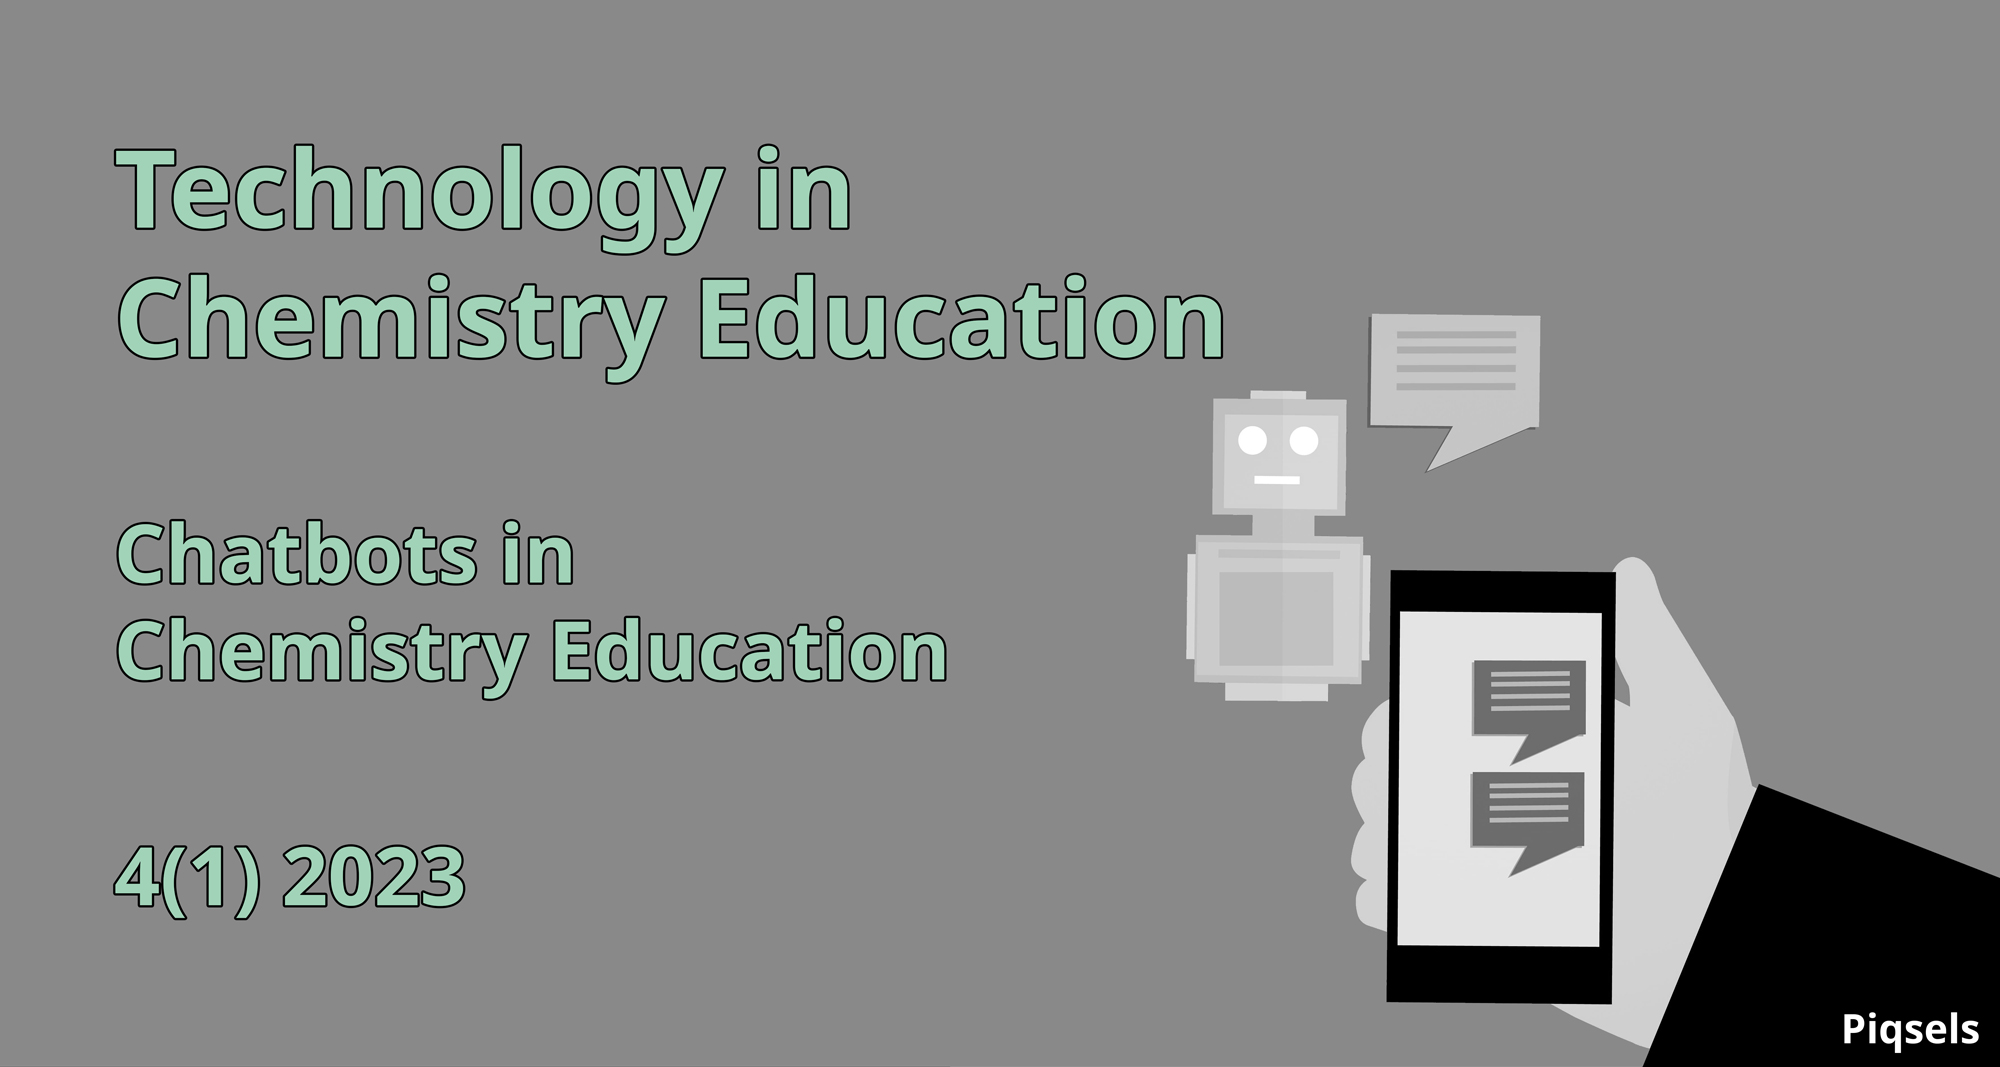 					View Vol. 4 No. 1 (2023): Chatbots in Chemistry Education – Preprints in 2023
				